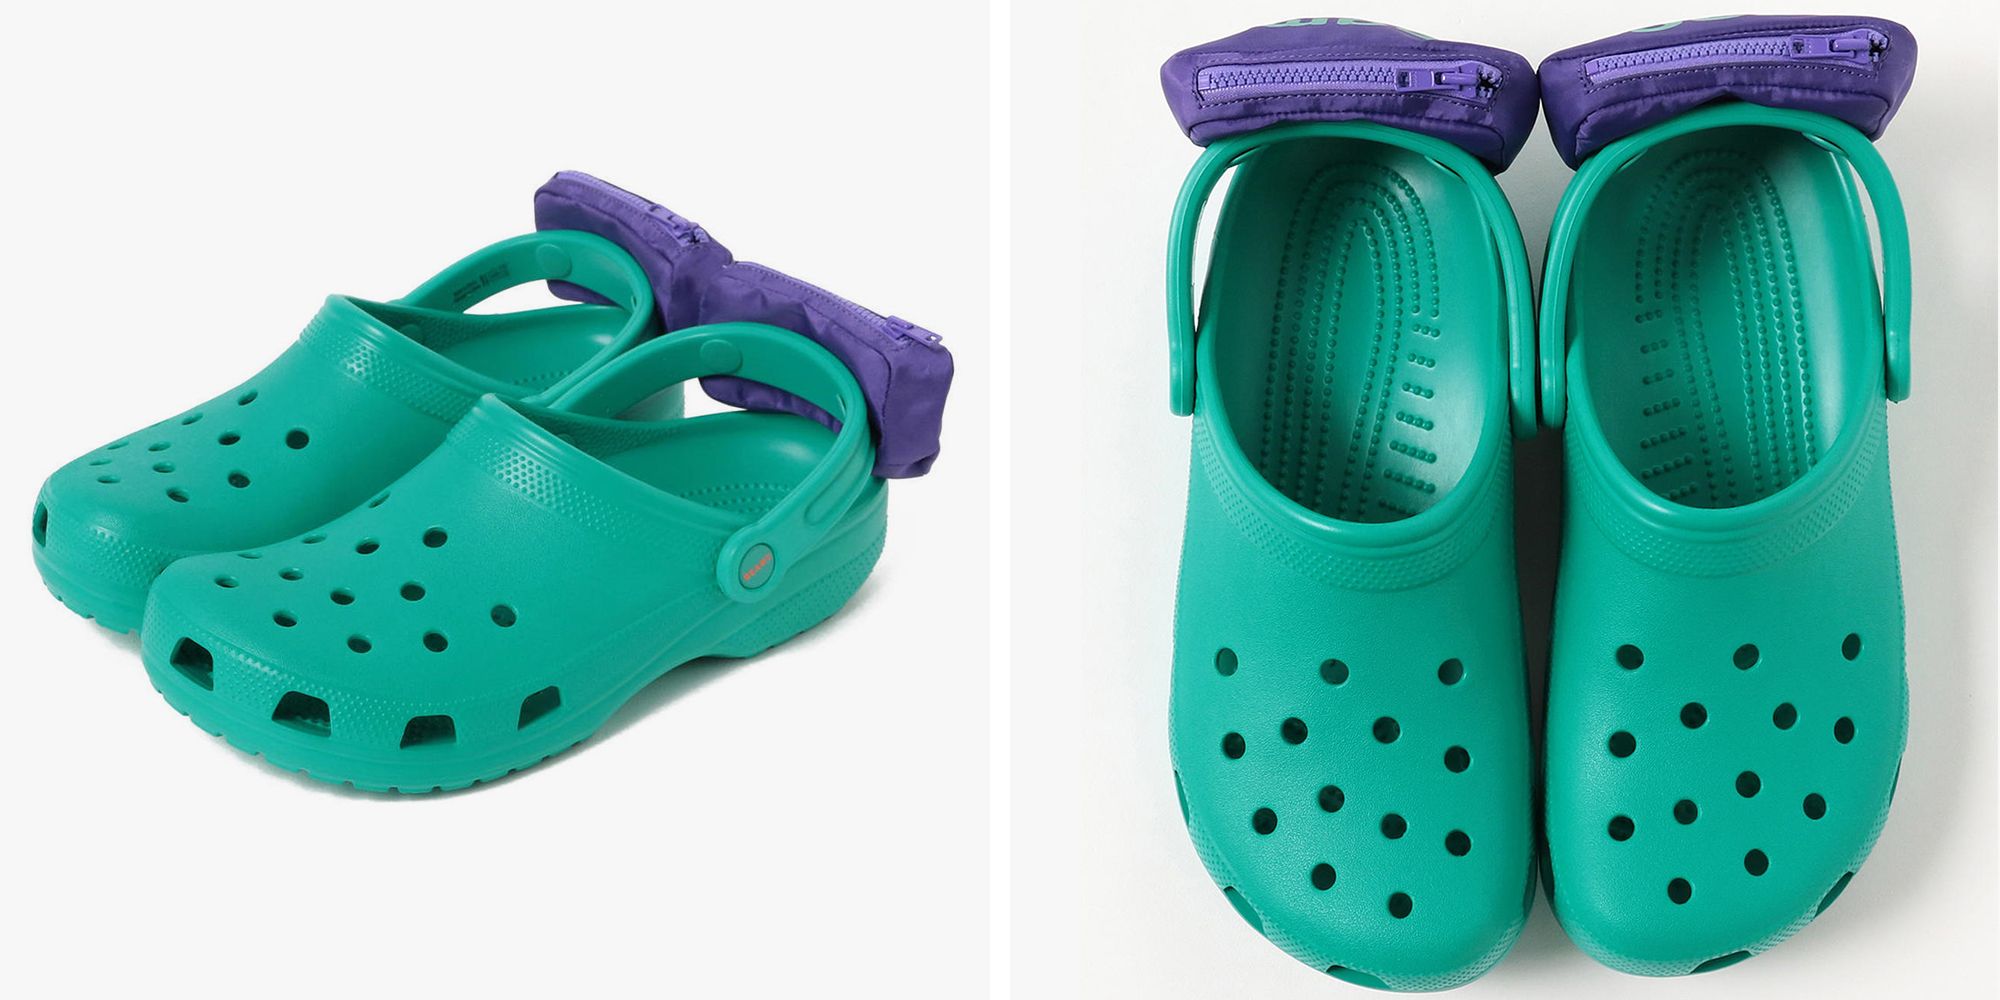 These Crocs Have Fanny Packs, So Good Luck Finding a Better Pair of Shoes